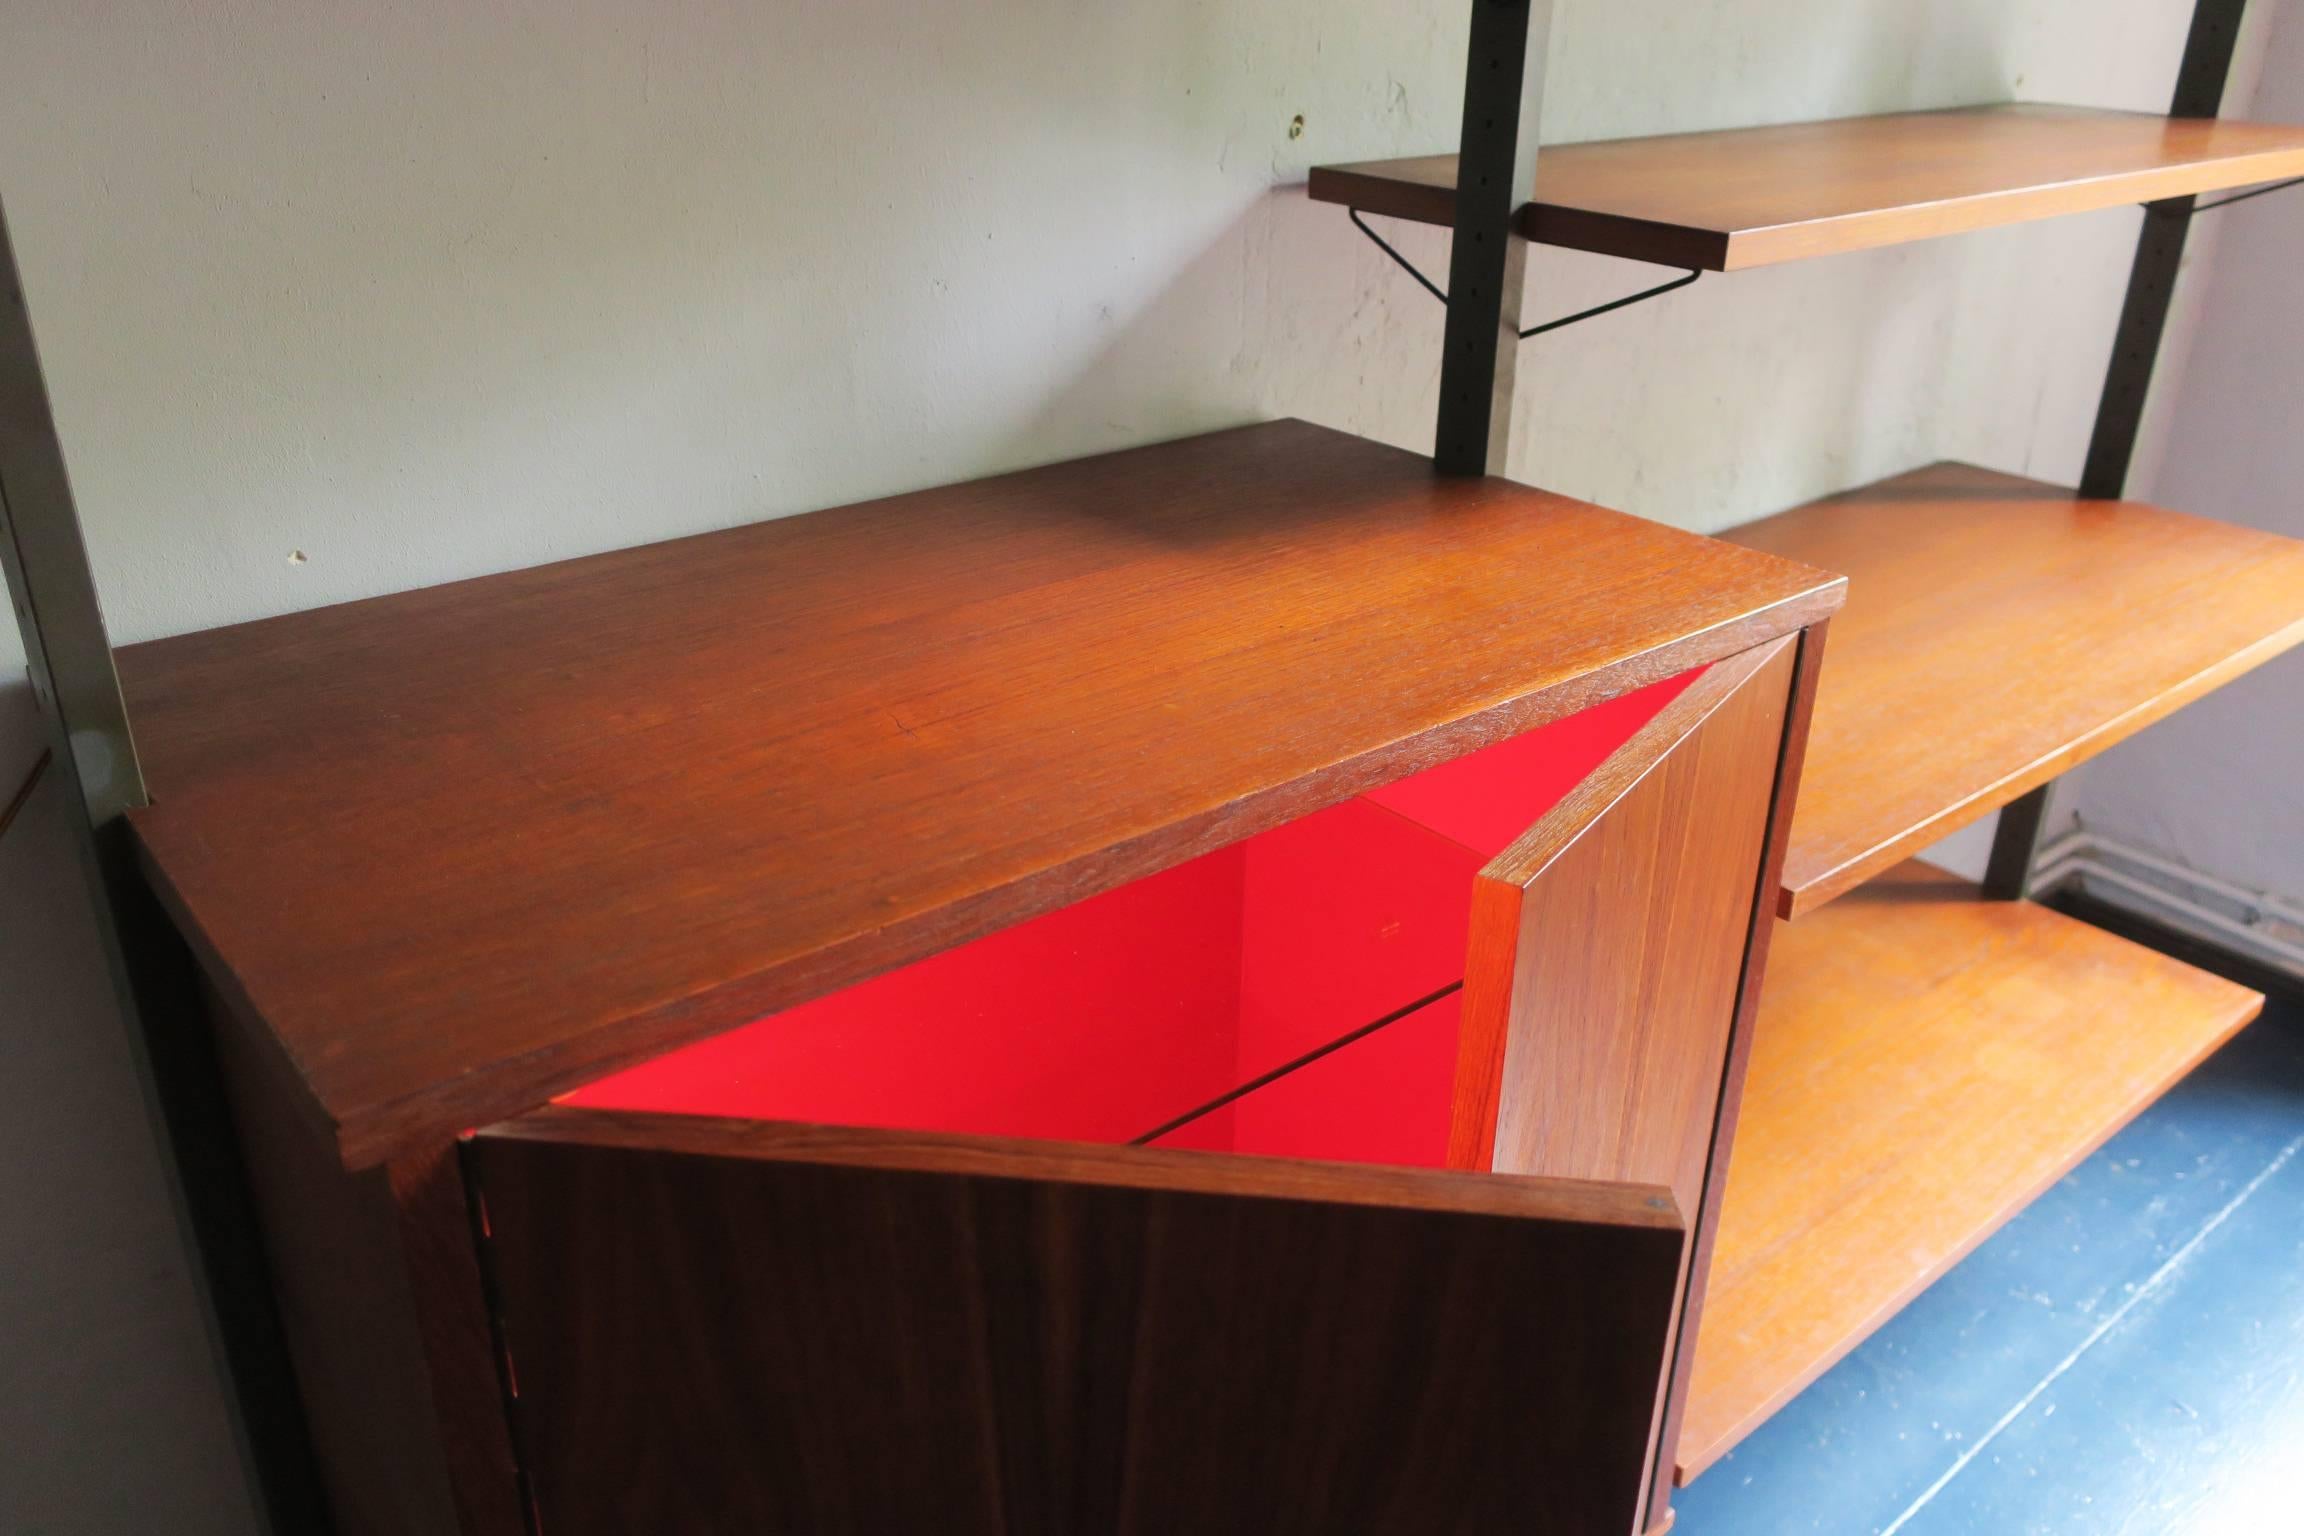 Rare Swedish teak modular shelf system by Olof Pira, 1960s.

One cabinet lights up on opening to reveal the red interior.

*Shipping to UK and Continental Europe: the prices given below on the listing only apply to certain areas on account of the